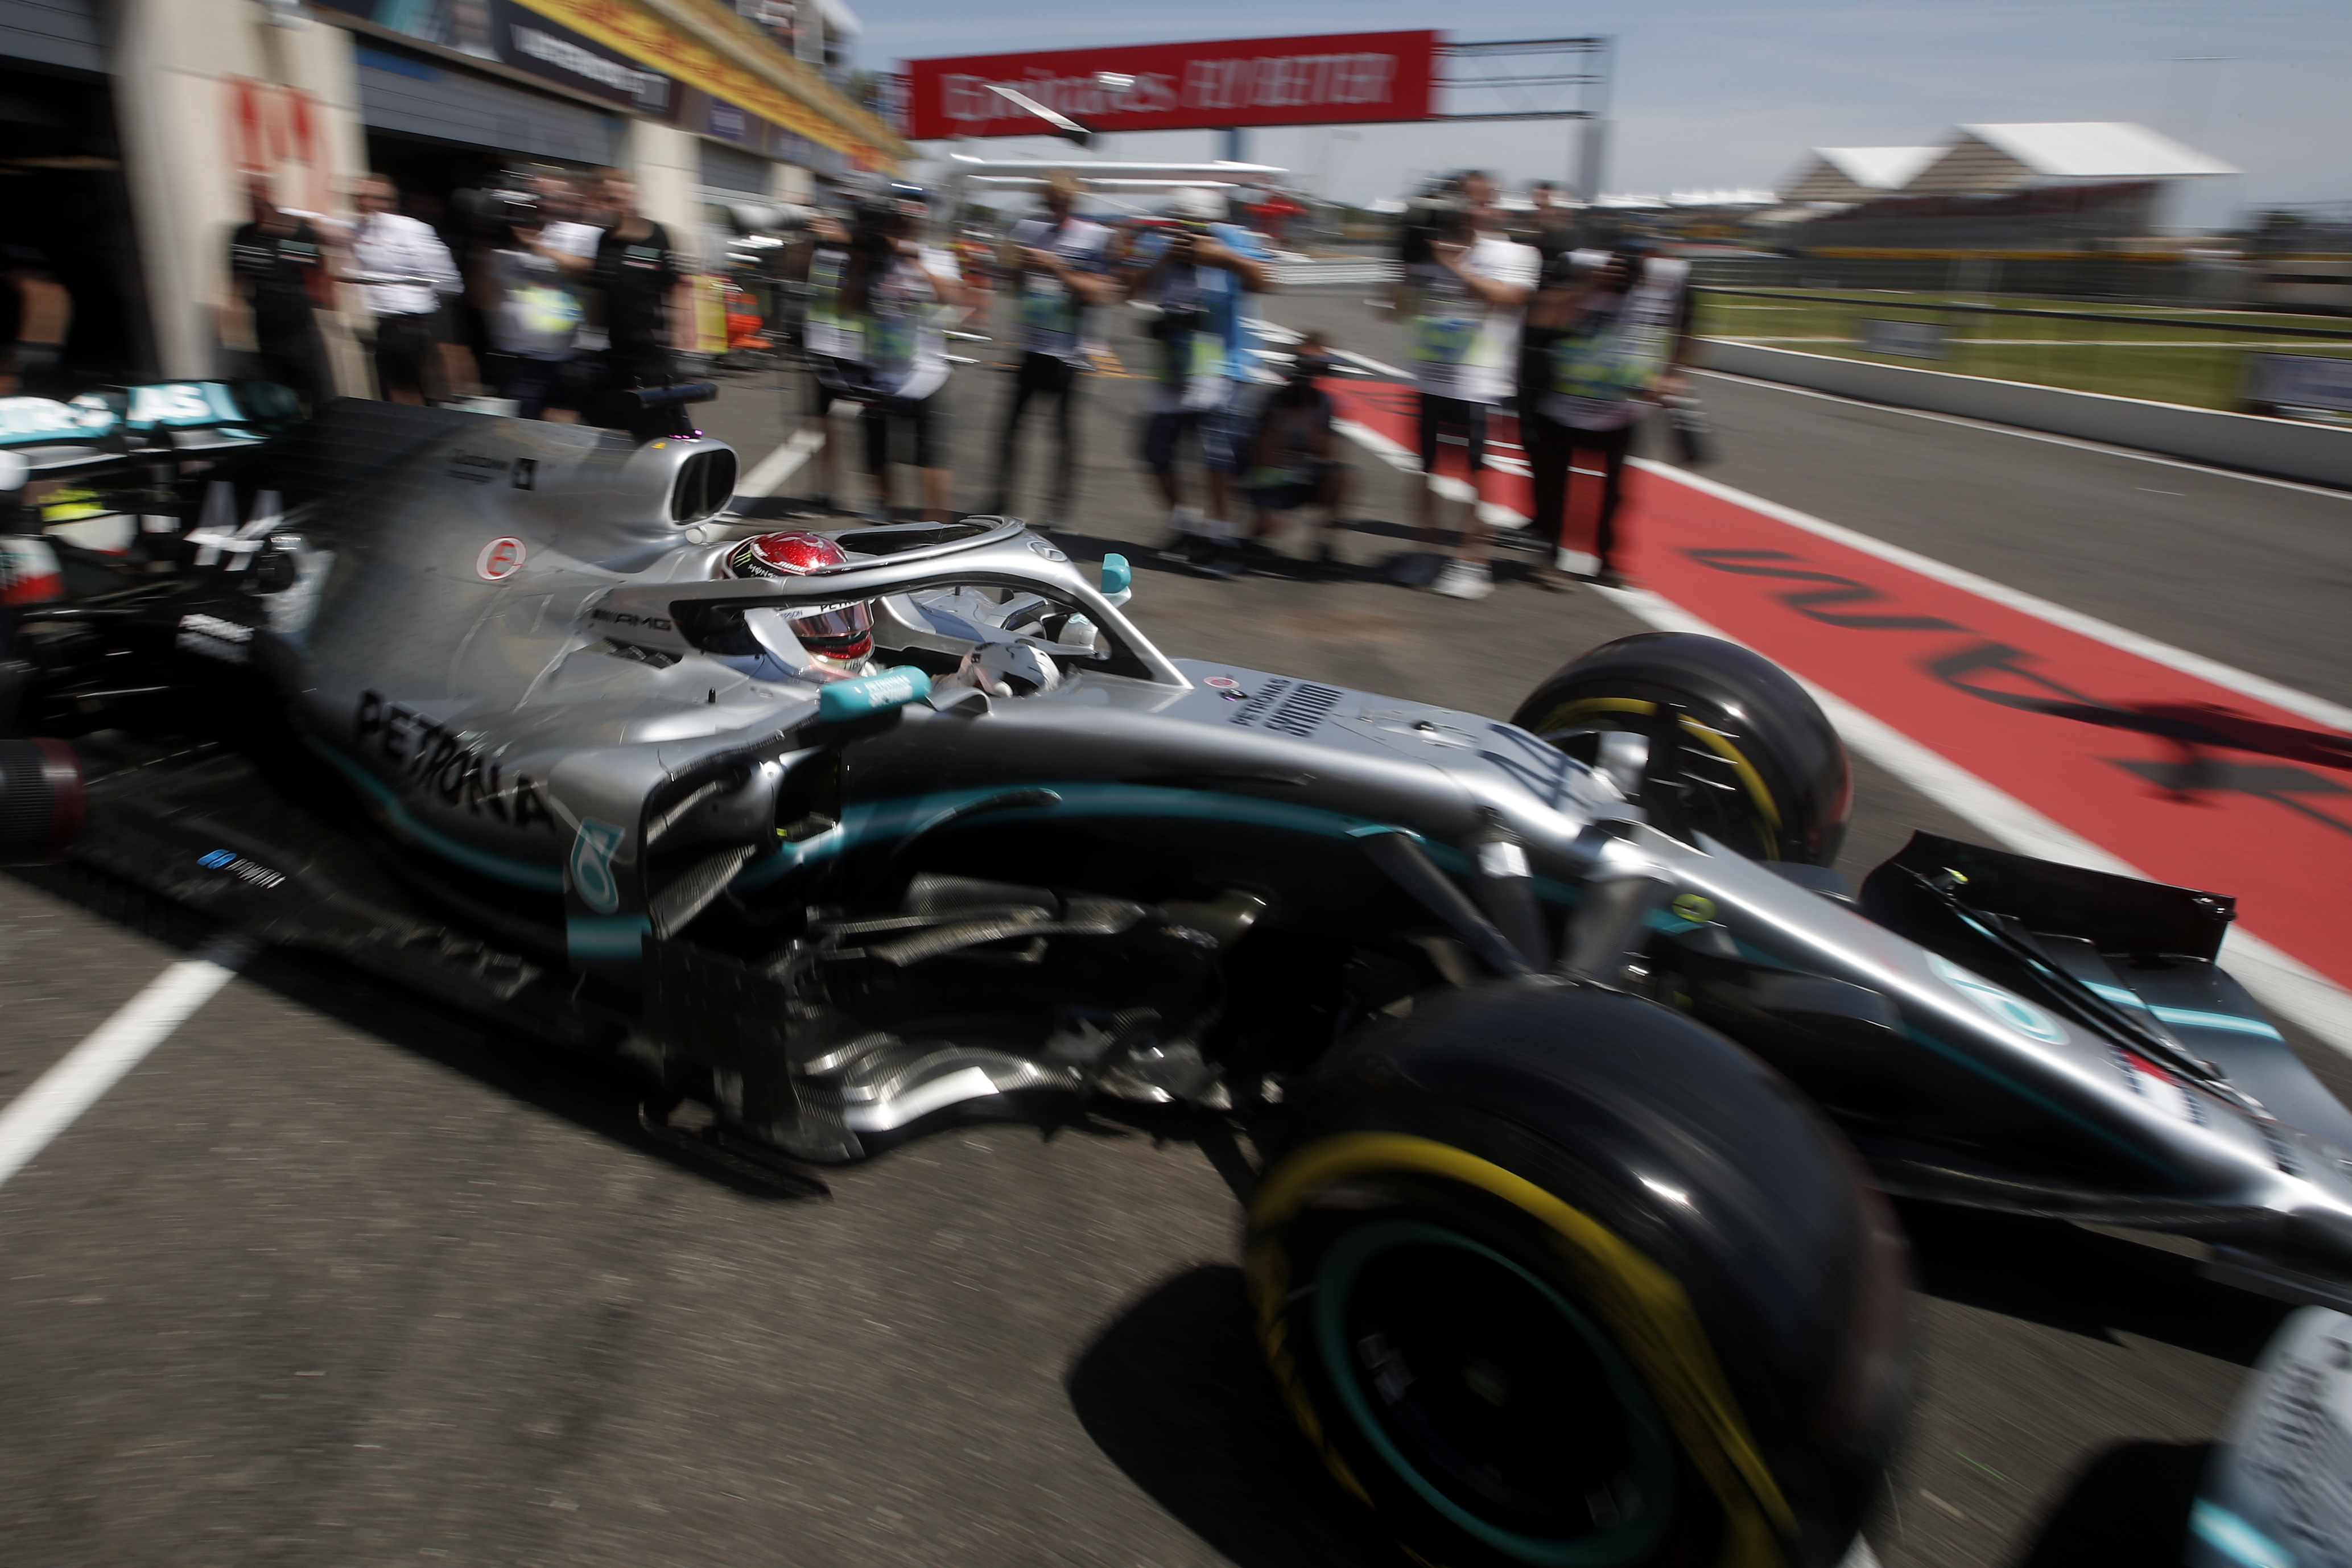 epa07663981 British Formula One driver Lewis Hamilton of Mercedes AMG GP leaves the garage during the second practice session of the French Formula One Grand Prix at Paul Ricard circuit in Le Castellet, France, 21 June 2019. The 2019 French Formula One Grand Prix will take place on 23 June.  EPA/YOAN VALAT